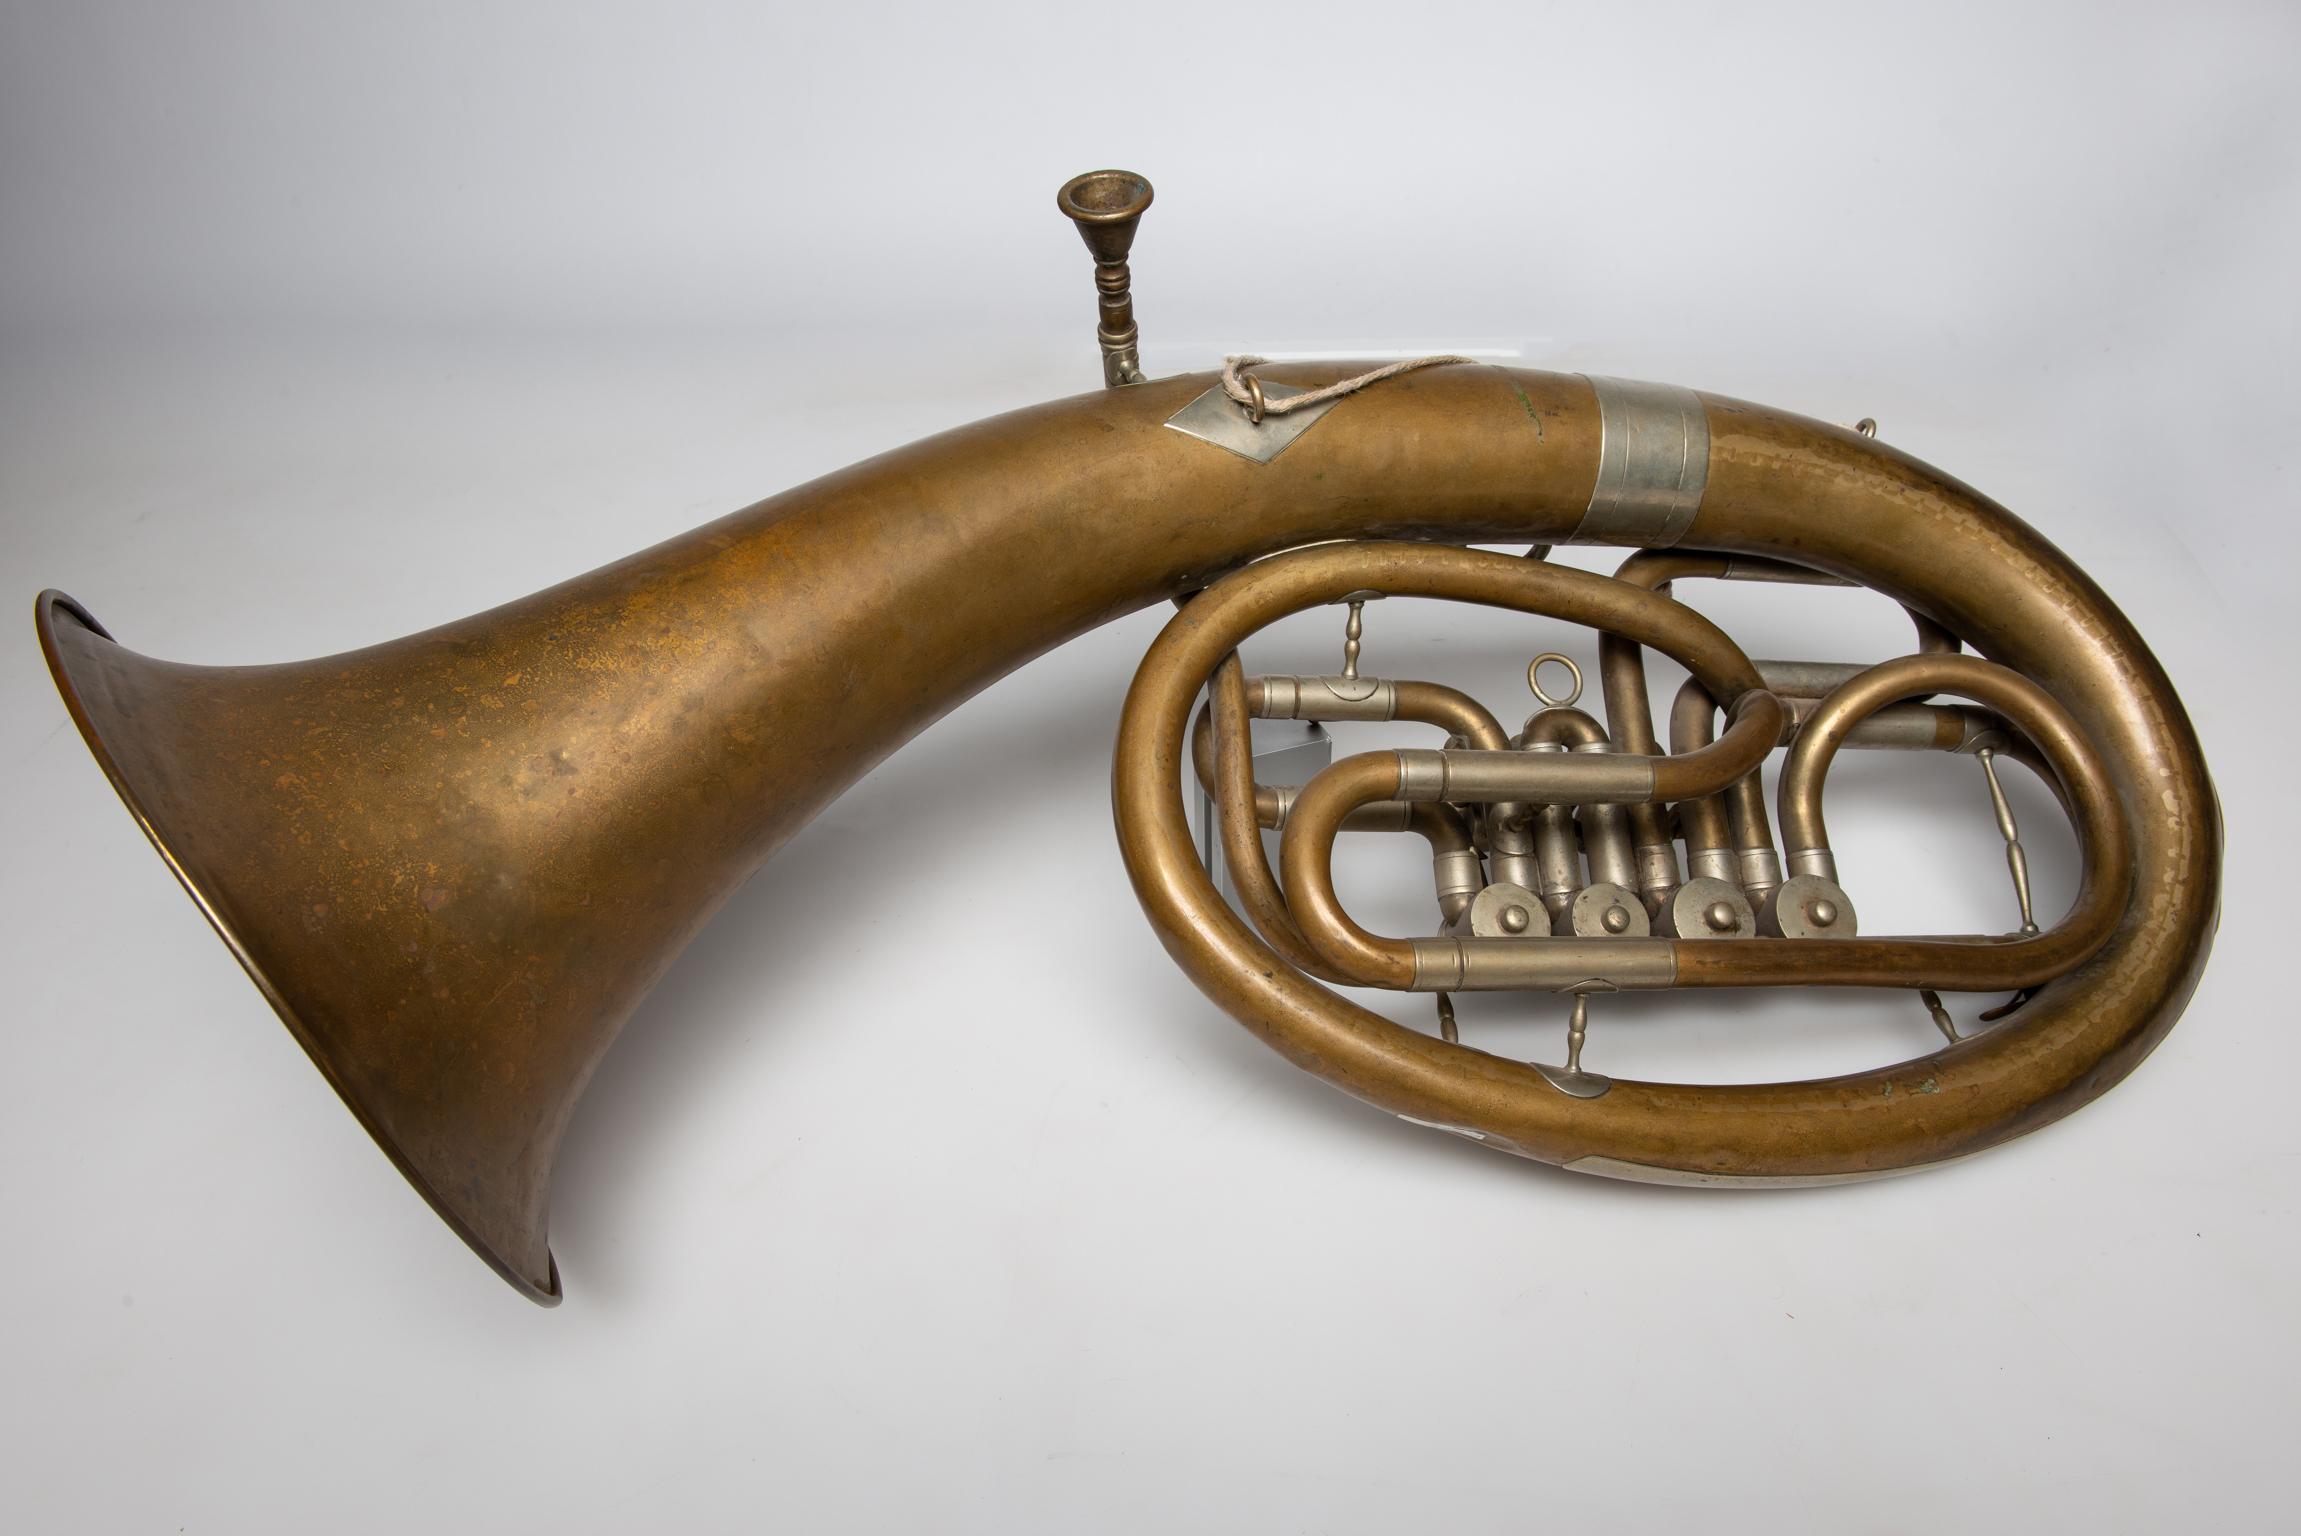 Tenor 4 cylinder flugelhorn - This tenor flugelhorn was made by V.F. Cerveny & S. - Hradec . Kralove - The Company was established in 1842 in Hradeh Kralove, Czech Republic. It was Cerveny who originally designed the system of Rotary valves for the